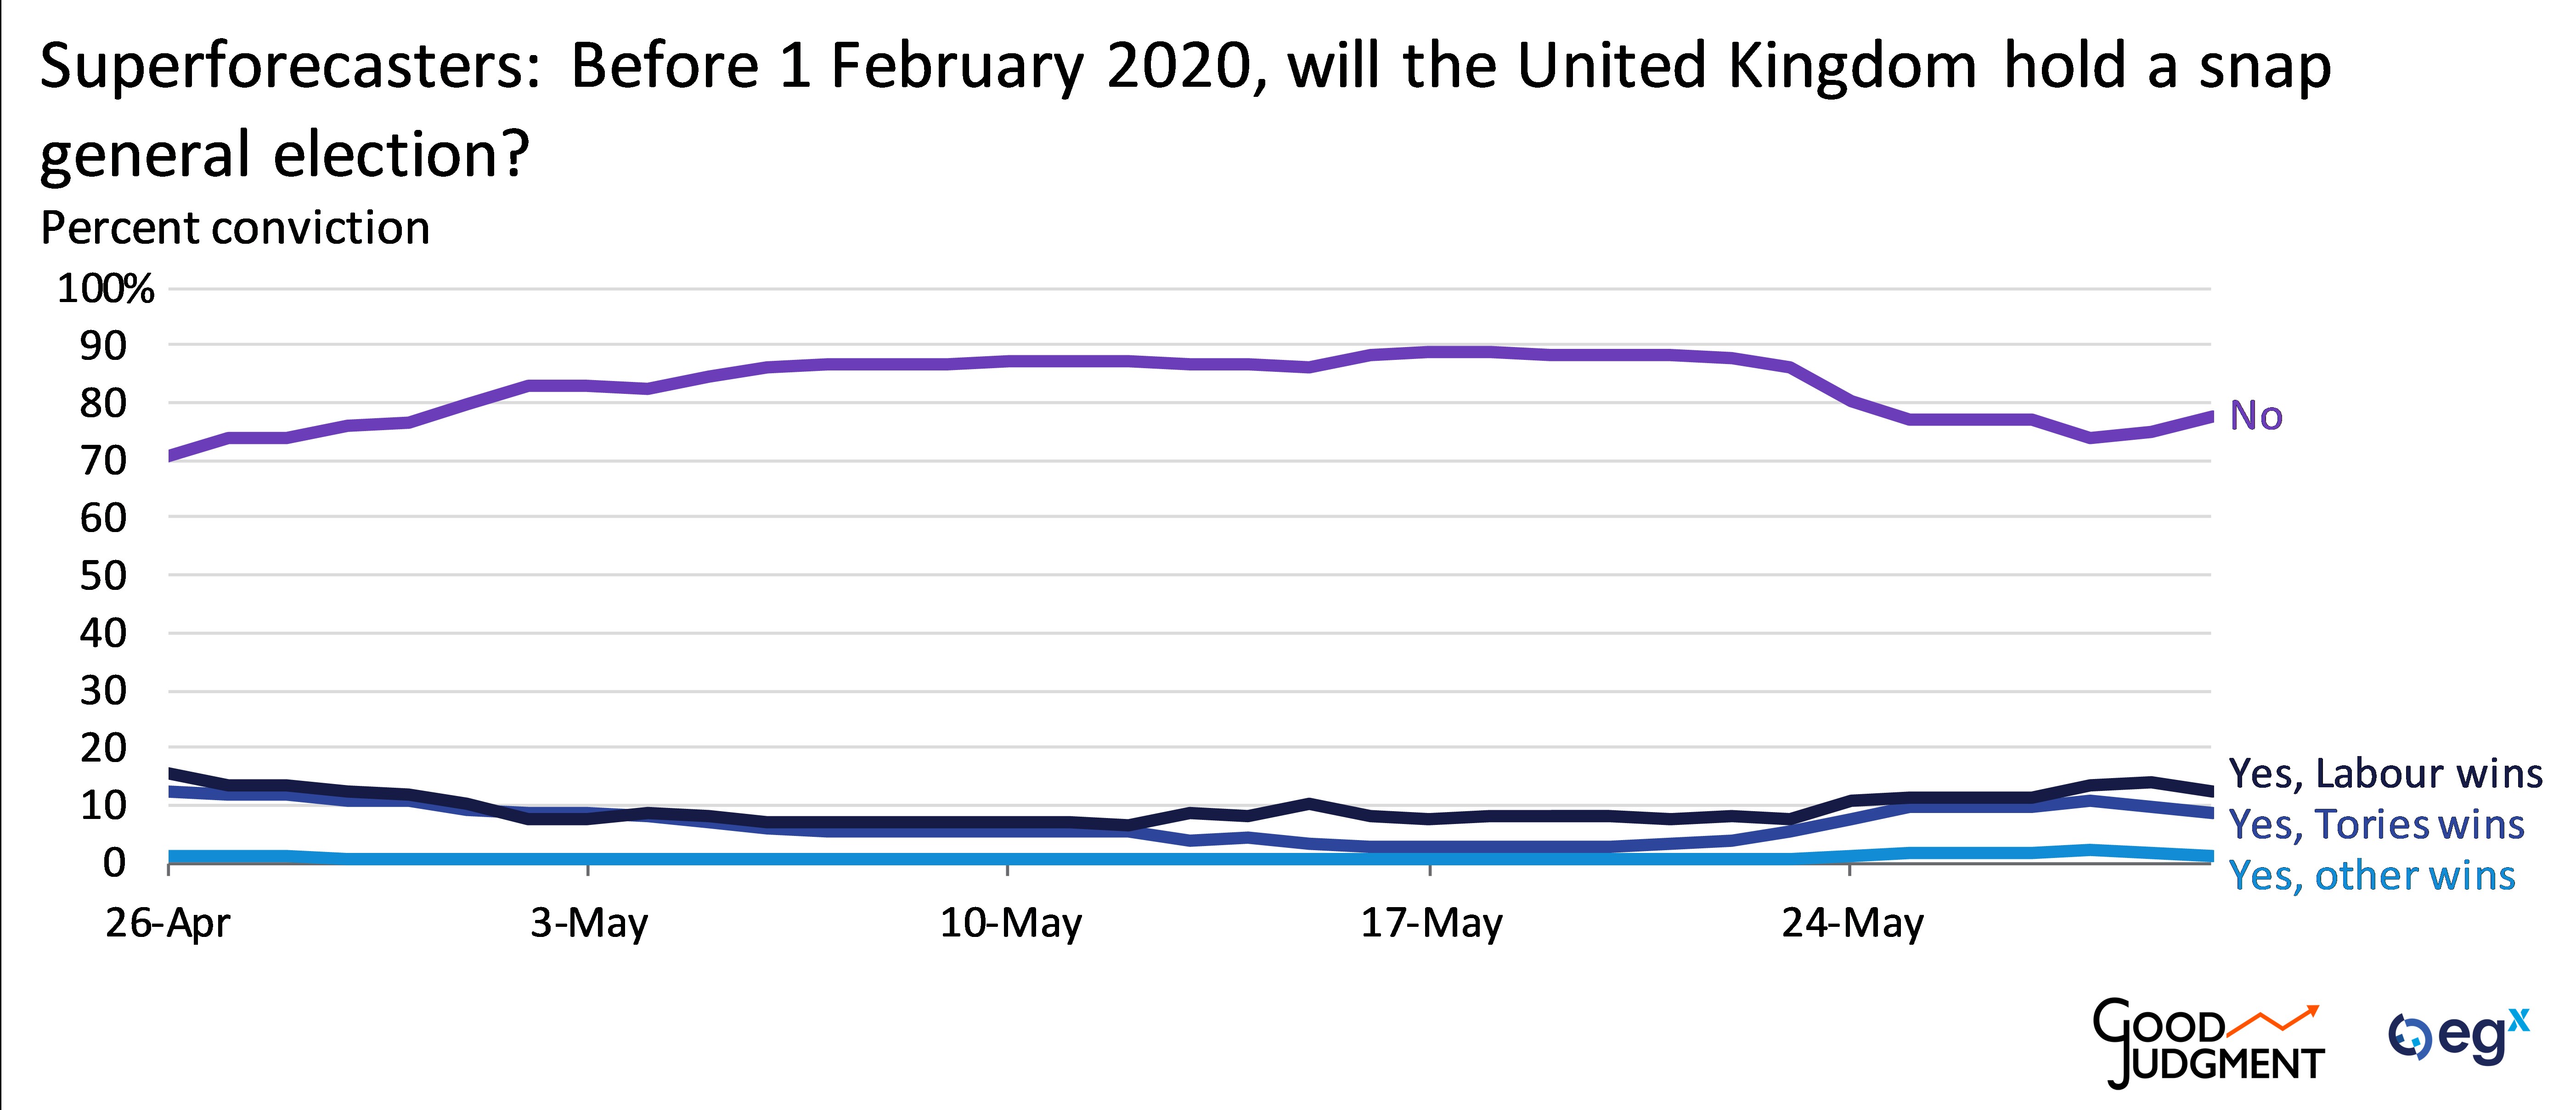 Superforecasters: Before 1 February 2020, will the United Kingdom hold a snap general election?